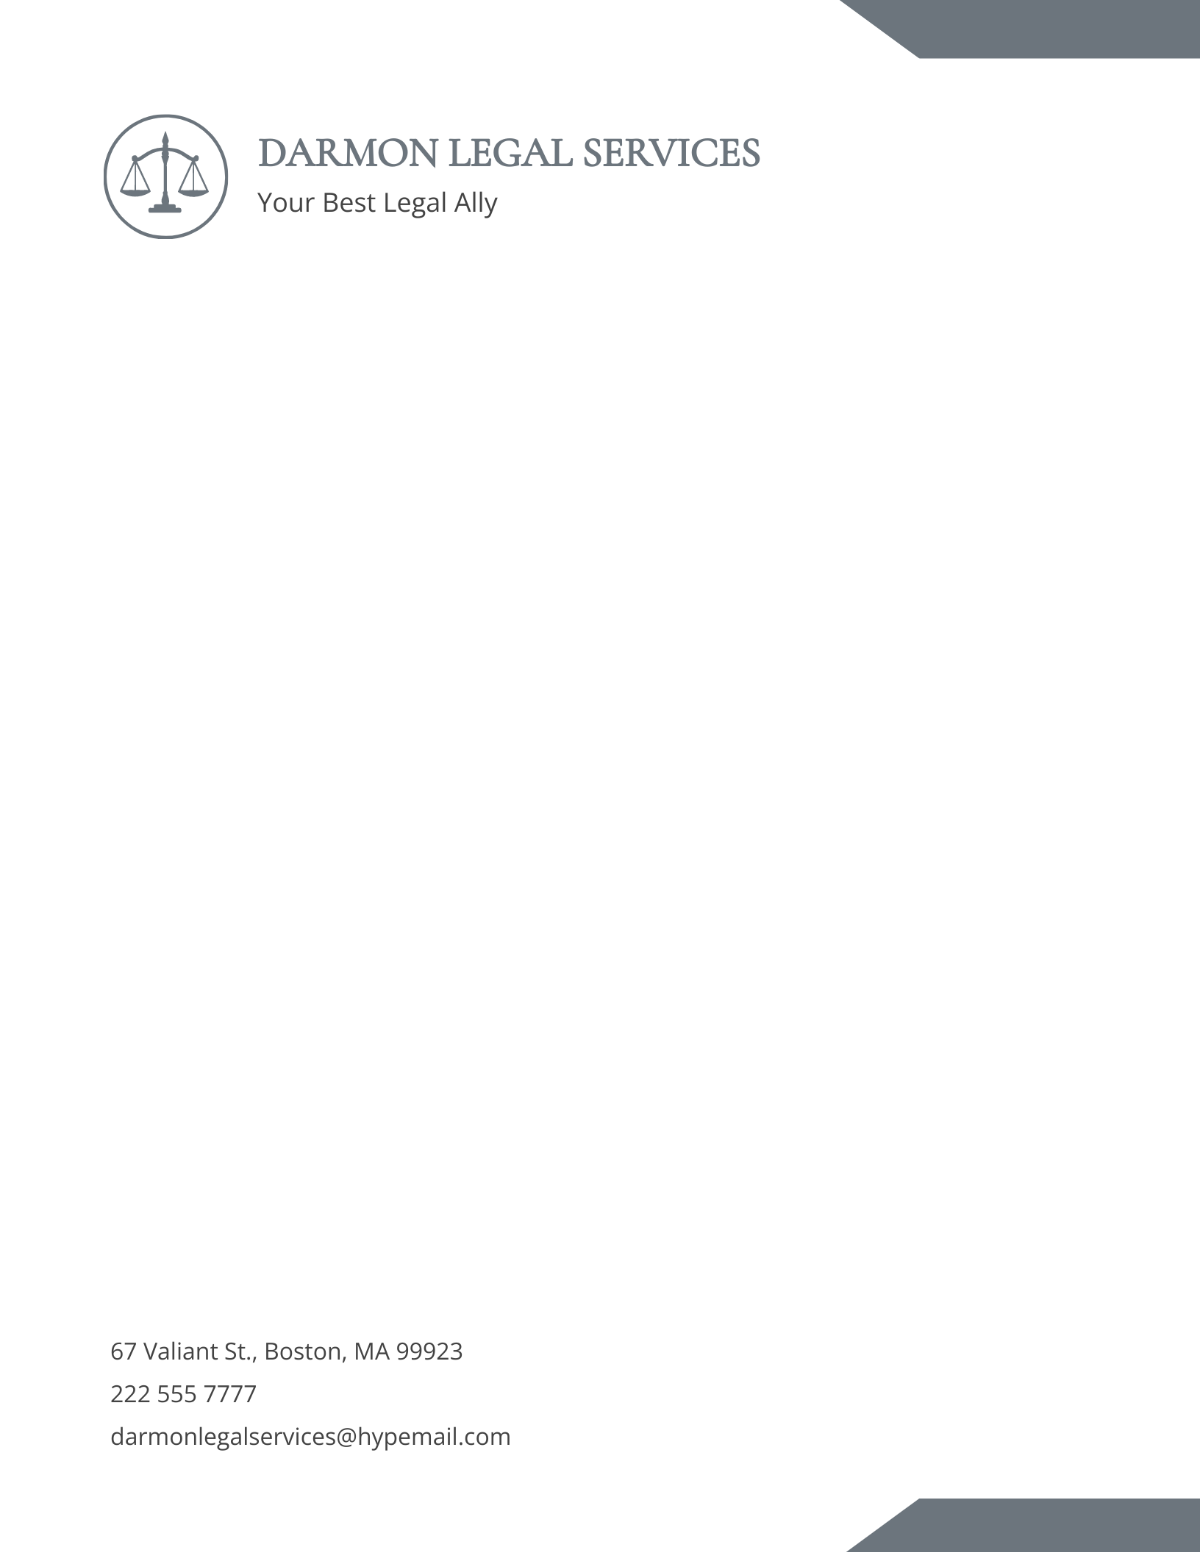 Free Justice Legal Services Letterhead Template